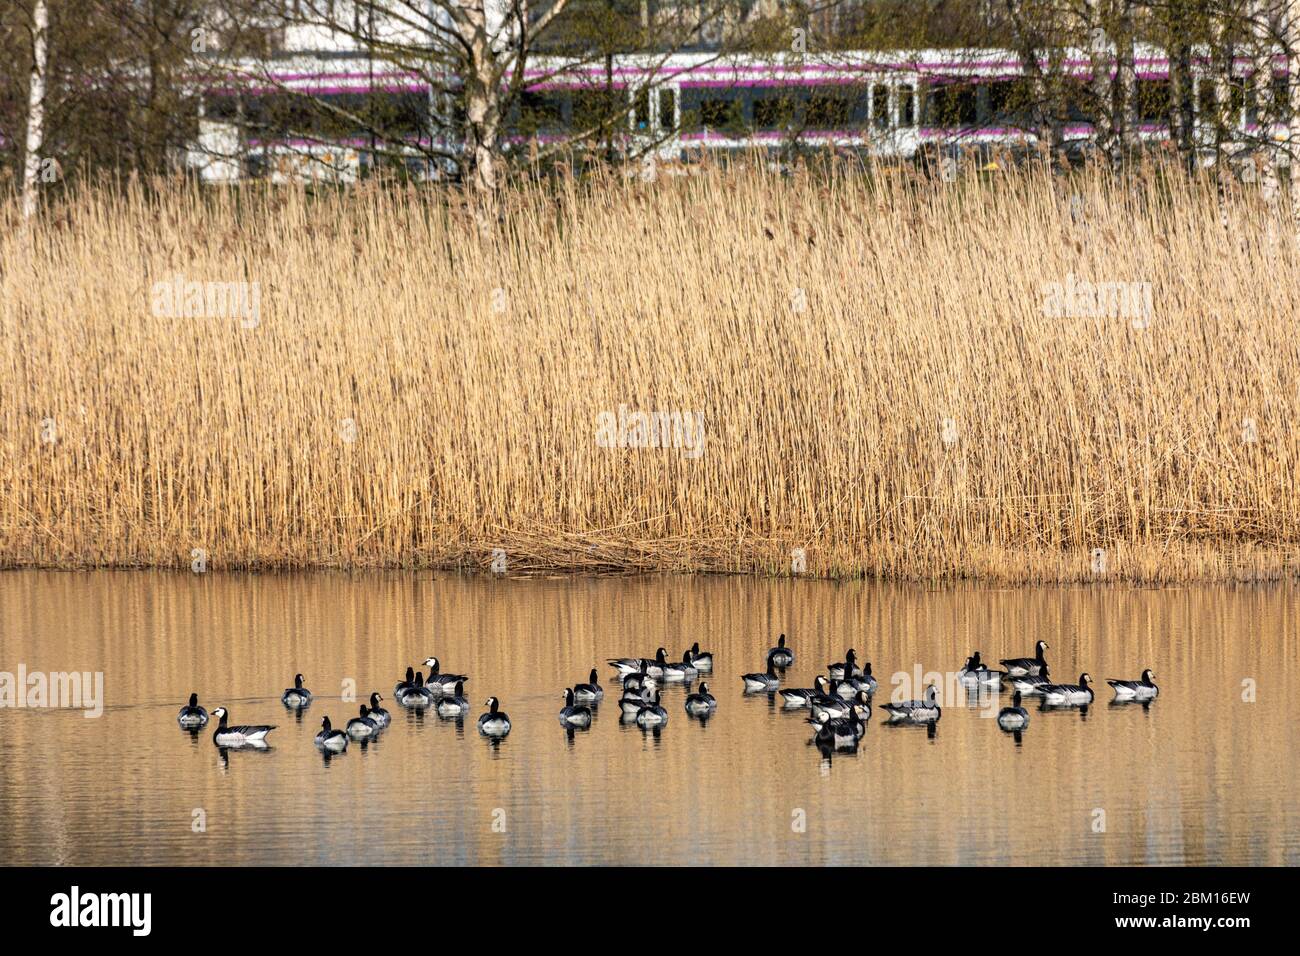 Barnacle geese (Branta leucopsis) on Töölönlahti Bay with reeds and passing commuter train in the background in Helsinki, Finland Stock Photo